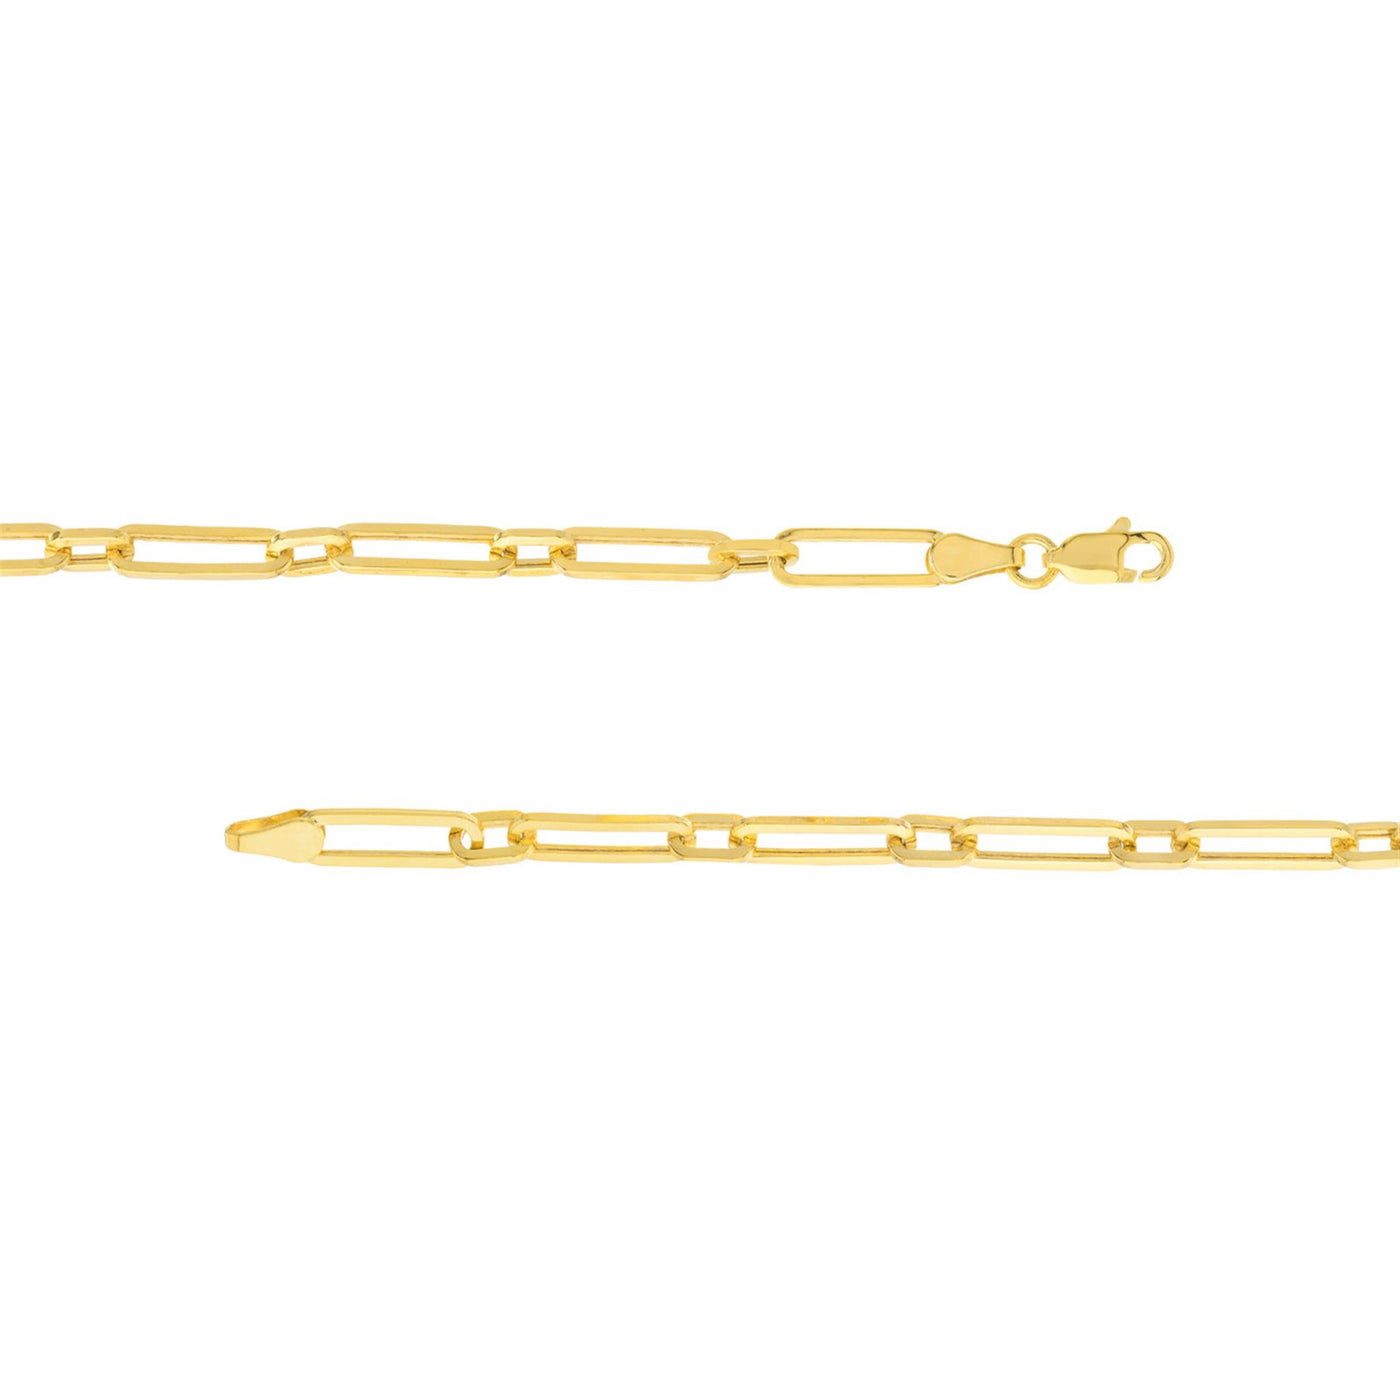 14K Yellow Gold 3.8mm 18" Paper Clip Chain